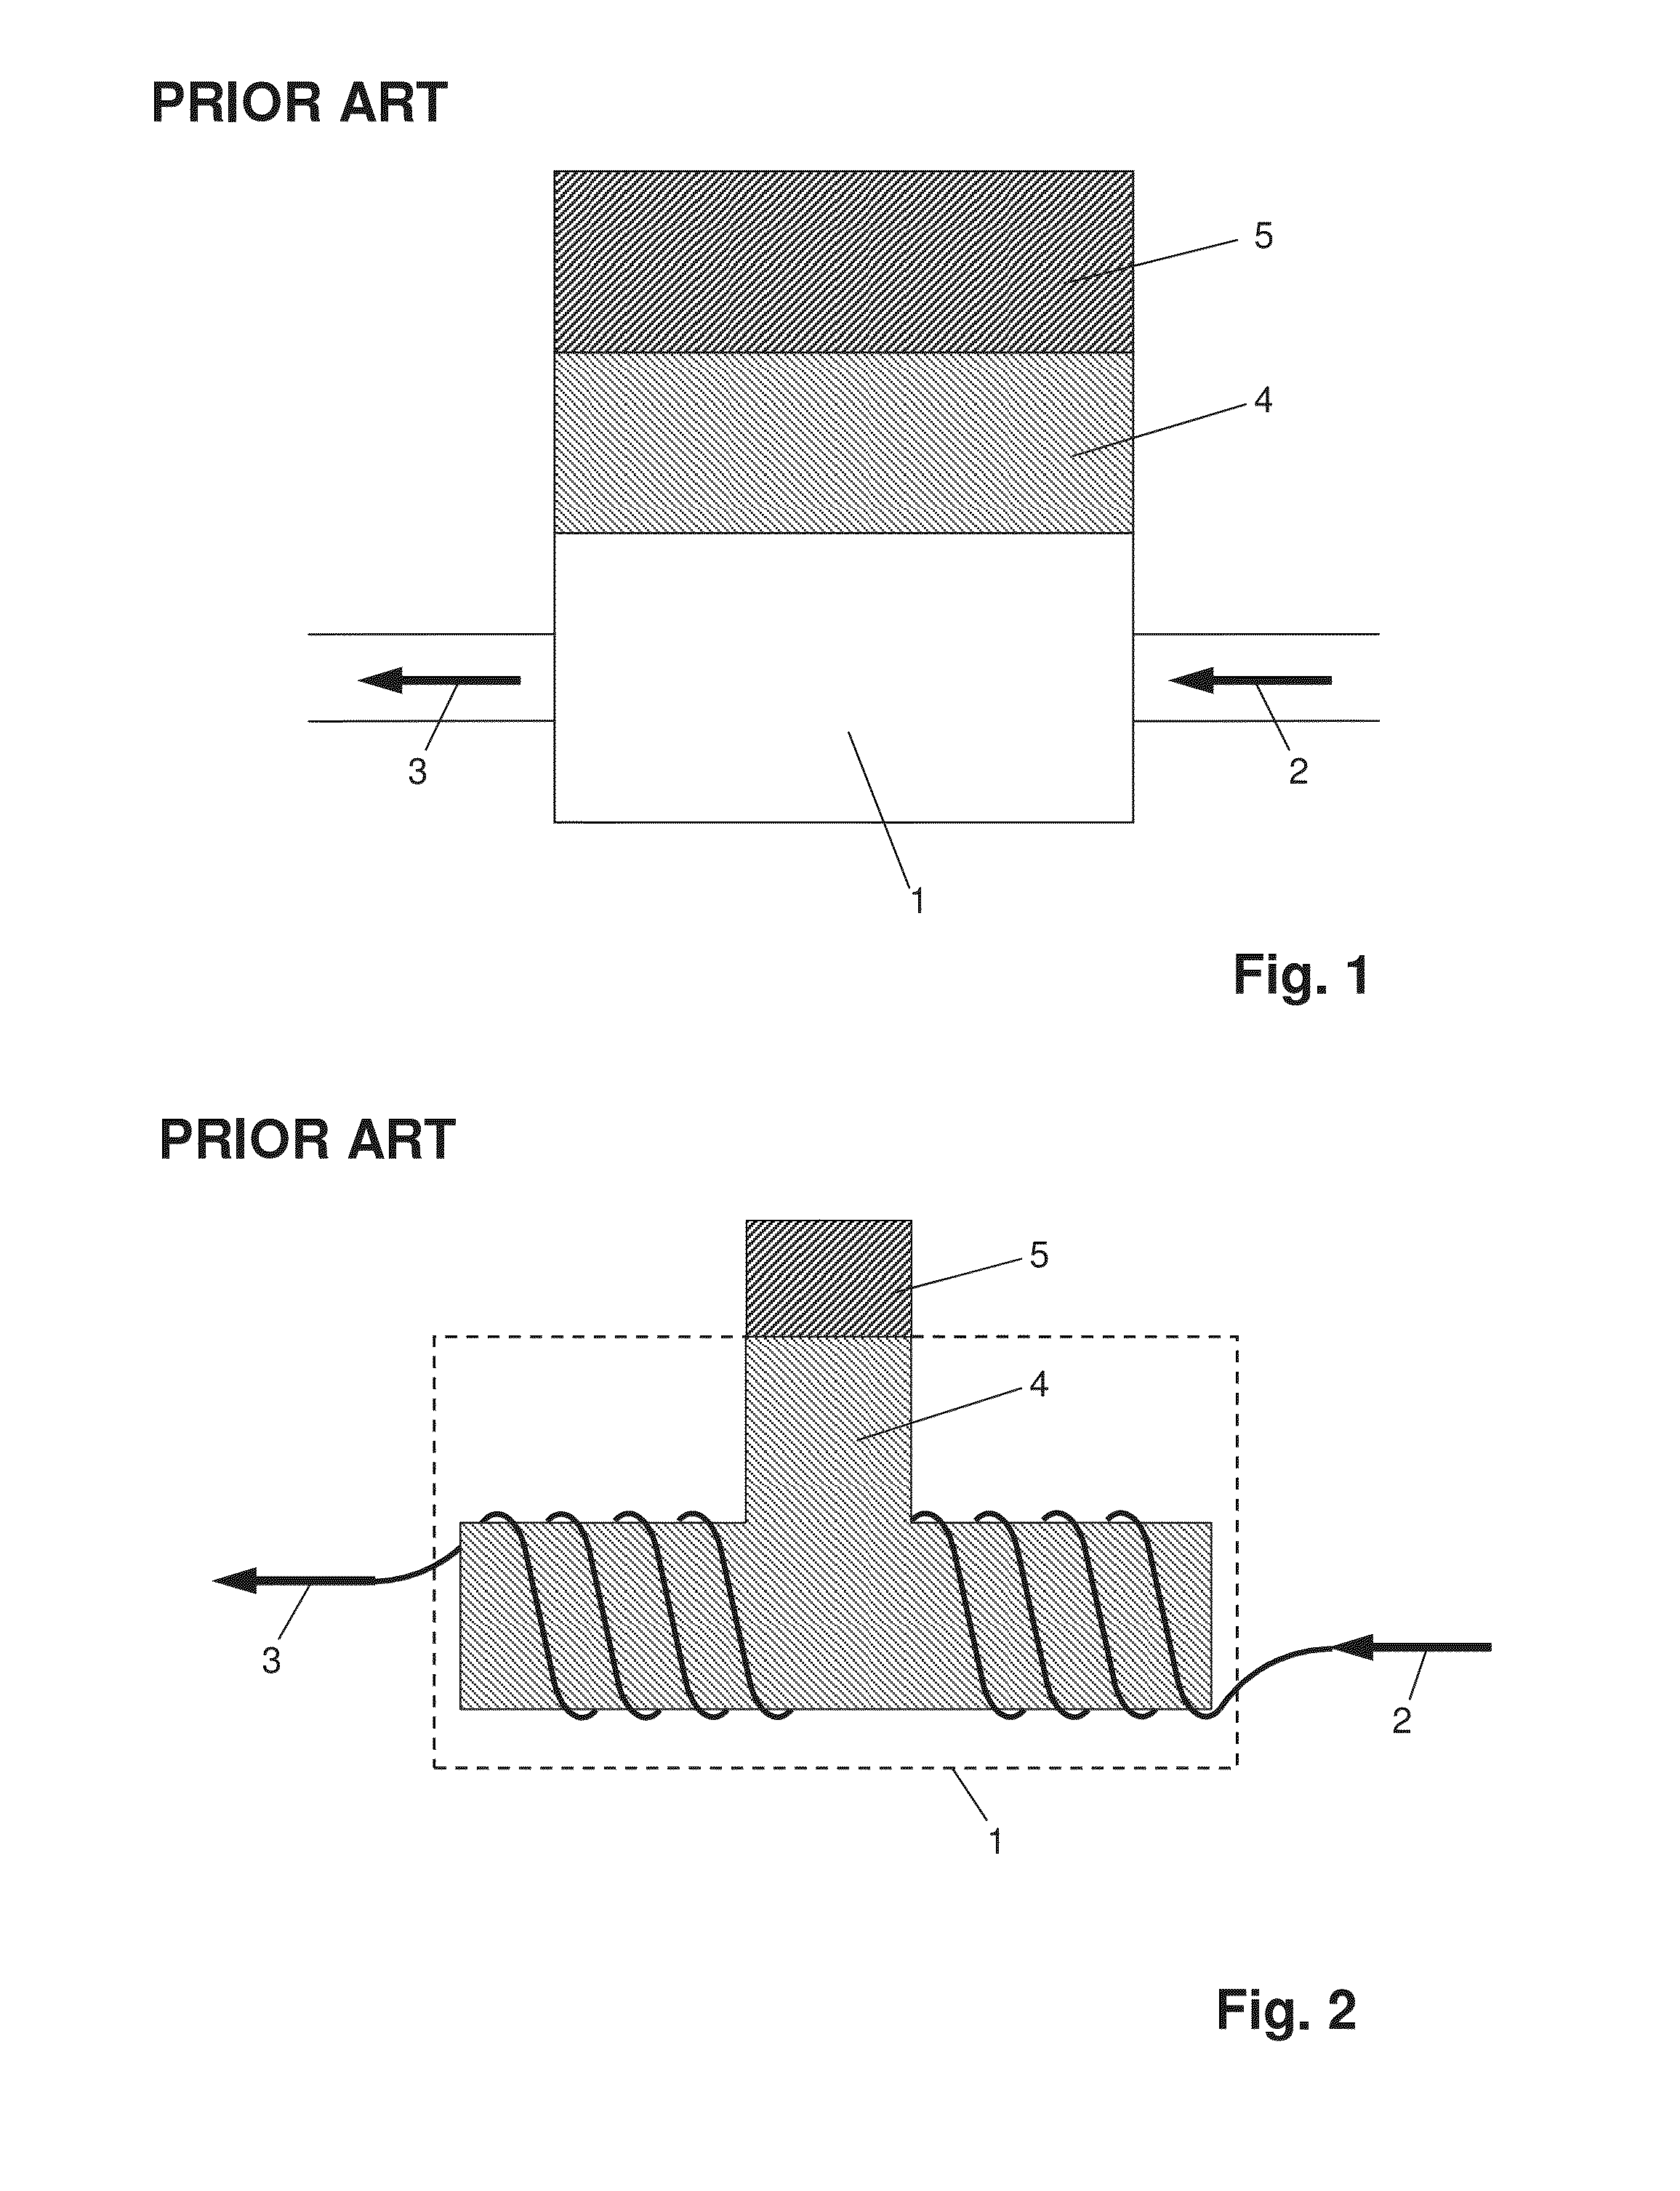 Method for cryogenic cooling of an NMR detection system with the assistance of a container filled with a cryogenic fluid